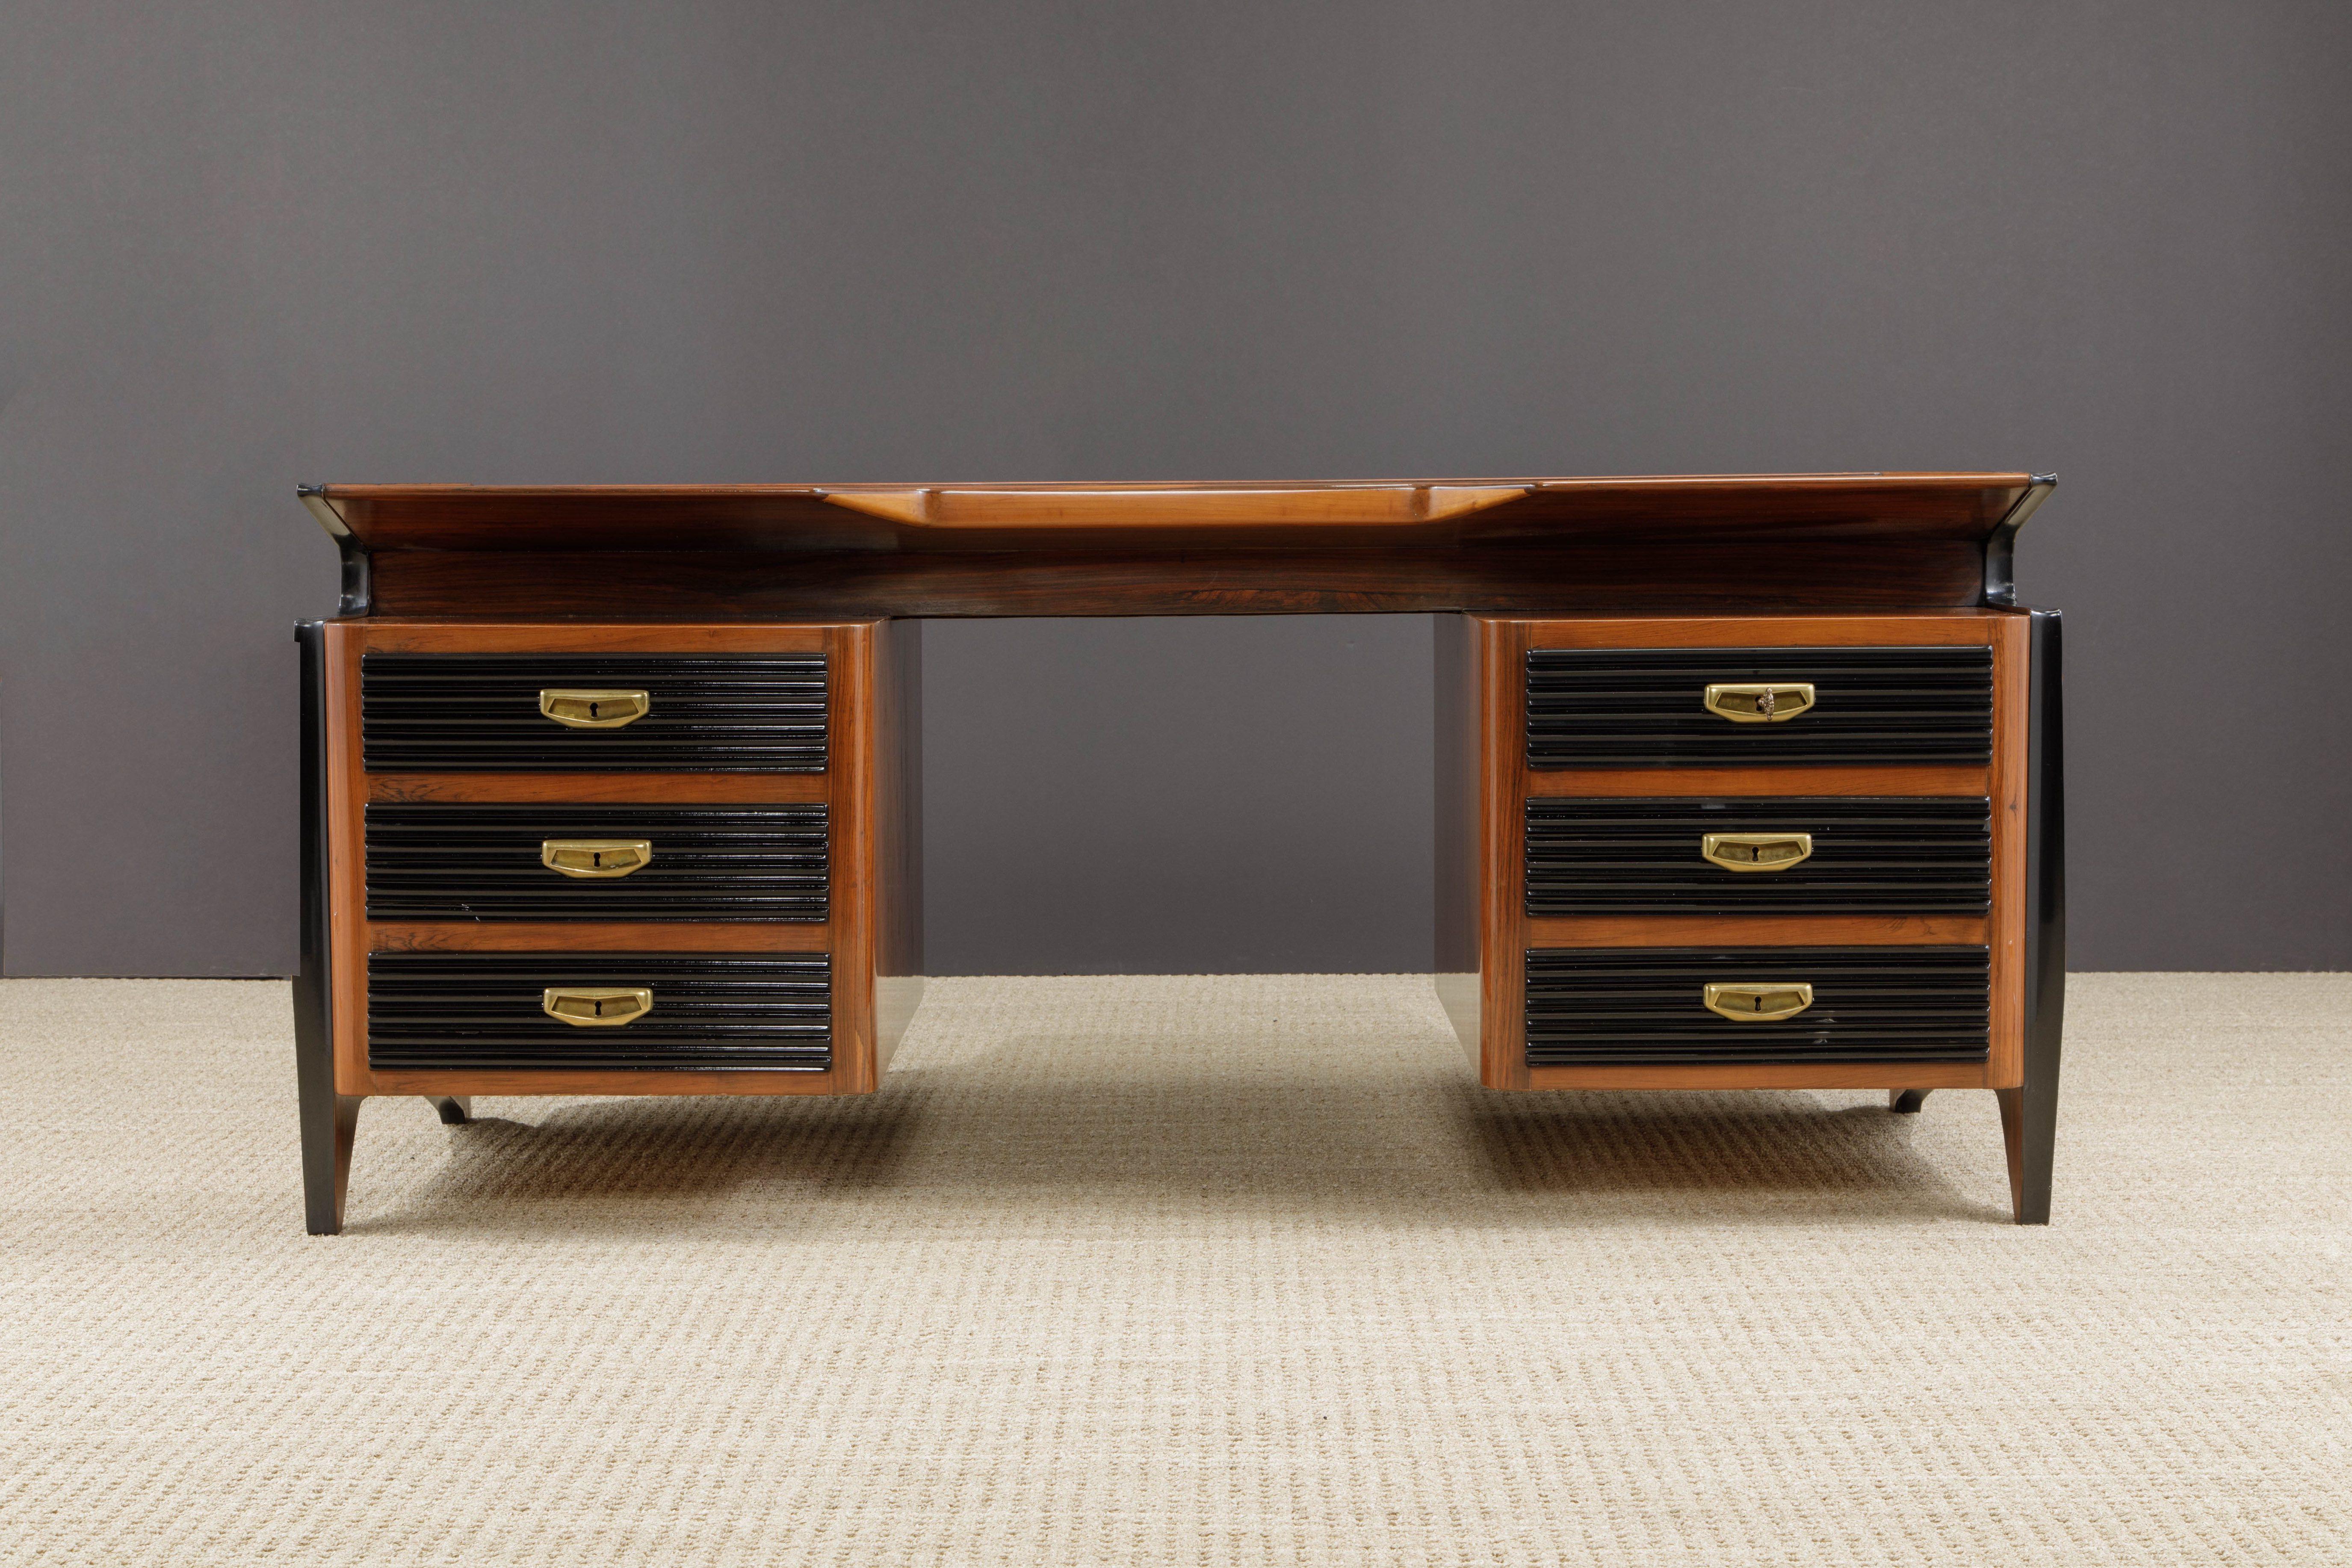 This incredible Italian Modernist Rosewood and Ebonized desk is attributed to Osvaldo Borsani and shares many similarities to designs by Gio Ponti. From its striking angular legs, floating pedestals and cut-out top to the ebonized ribbed drawers